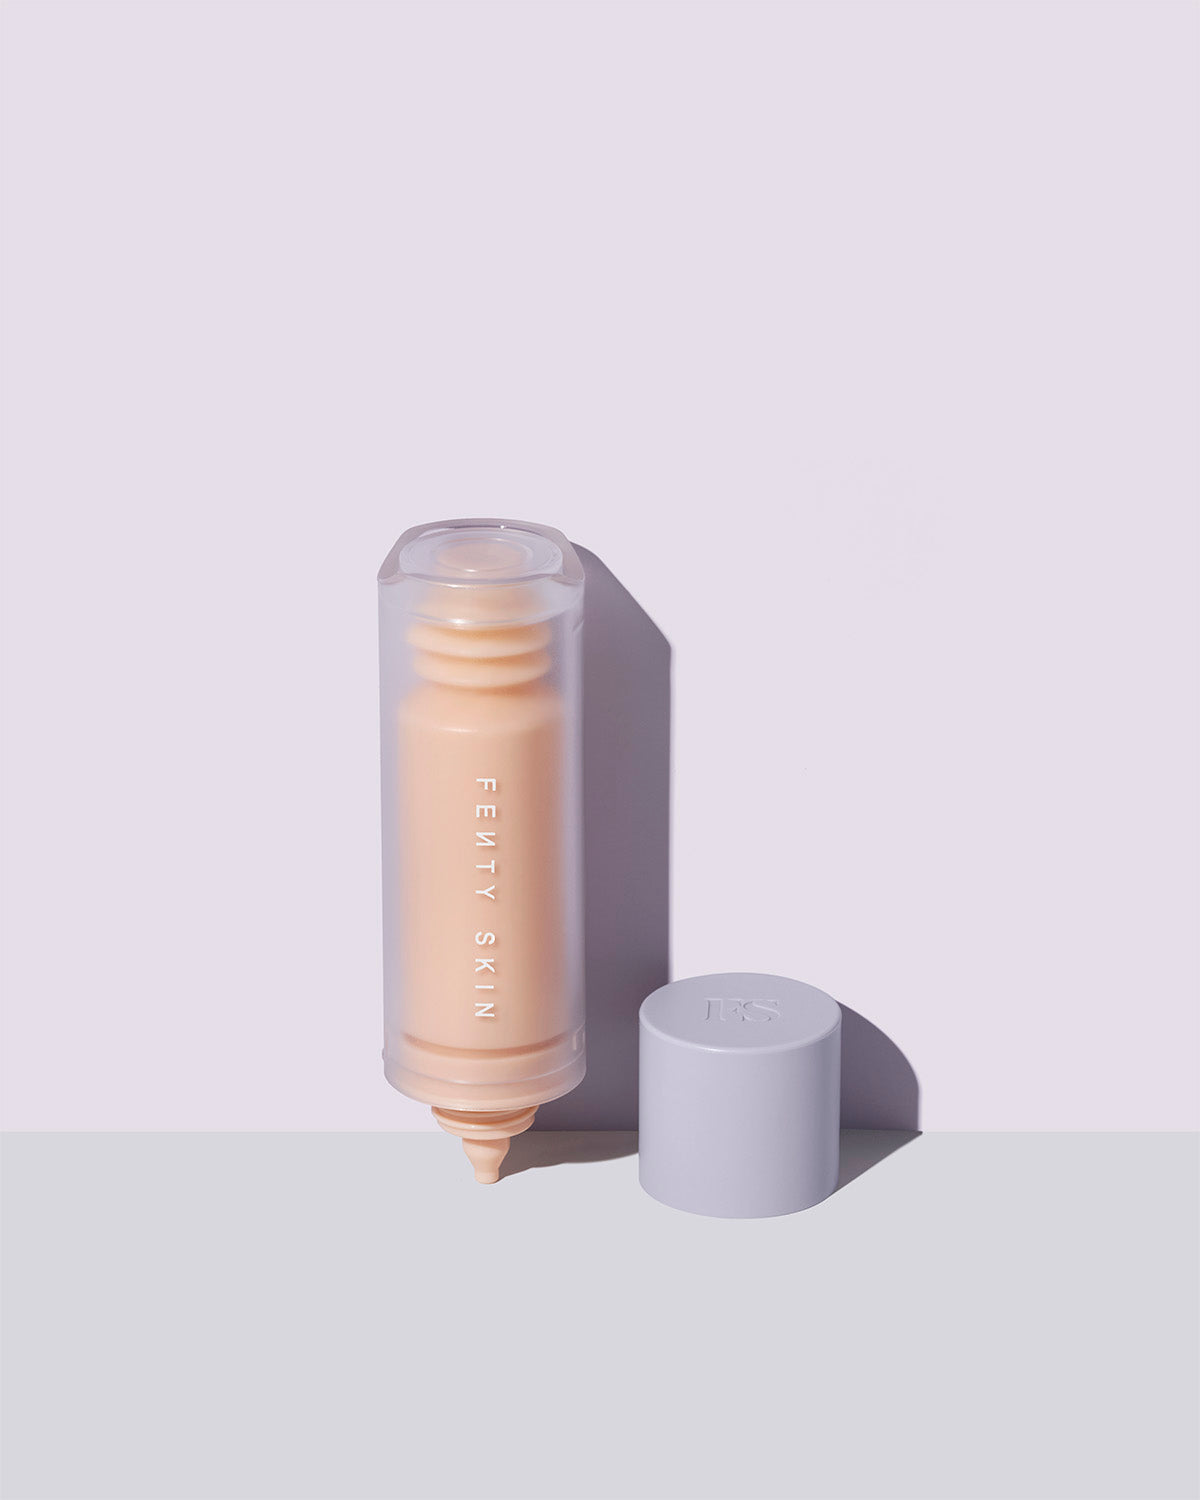 Fenty Skin and Fenty Beauty to Launch in Africa